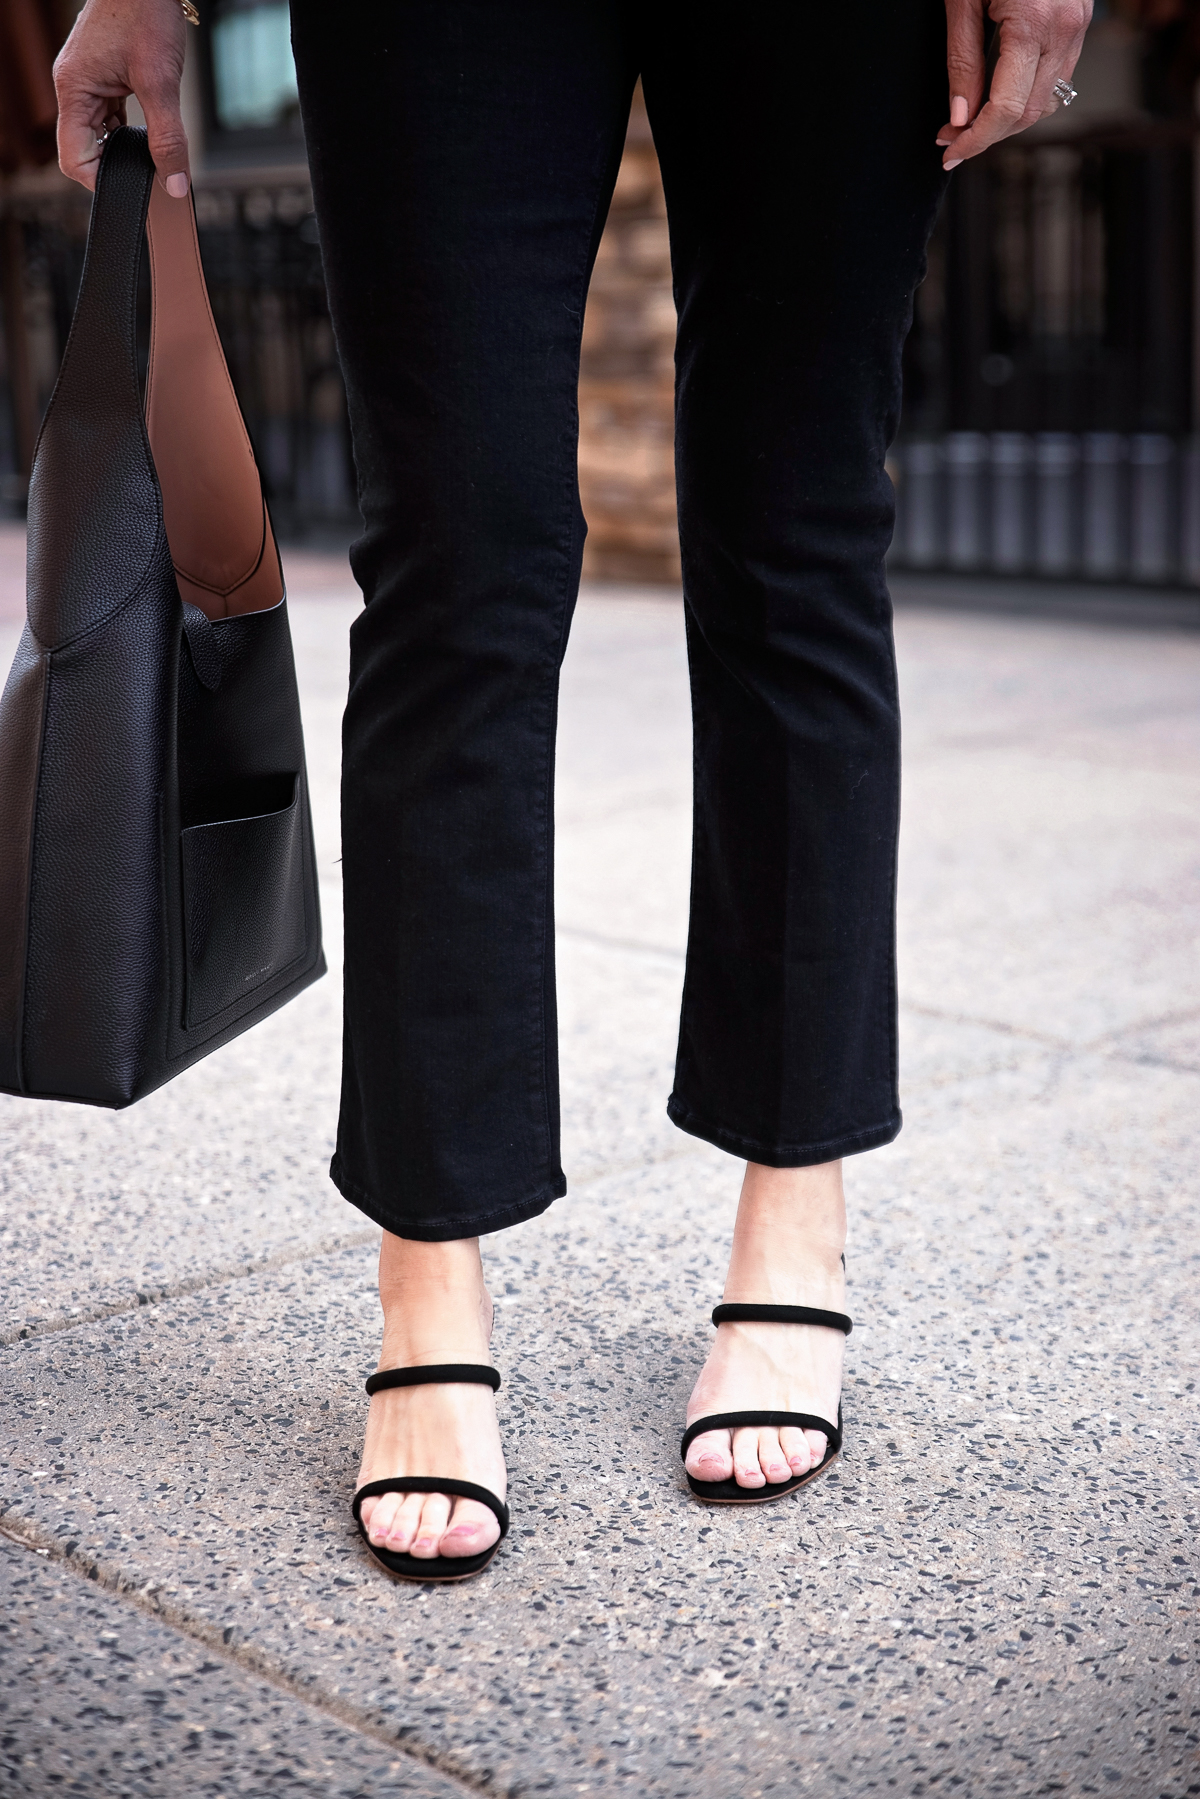 Mother The Insider Crop Jeans in Not Guilty with Steve Madden Honey Slide Sandals